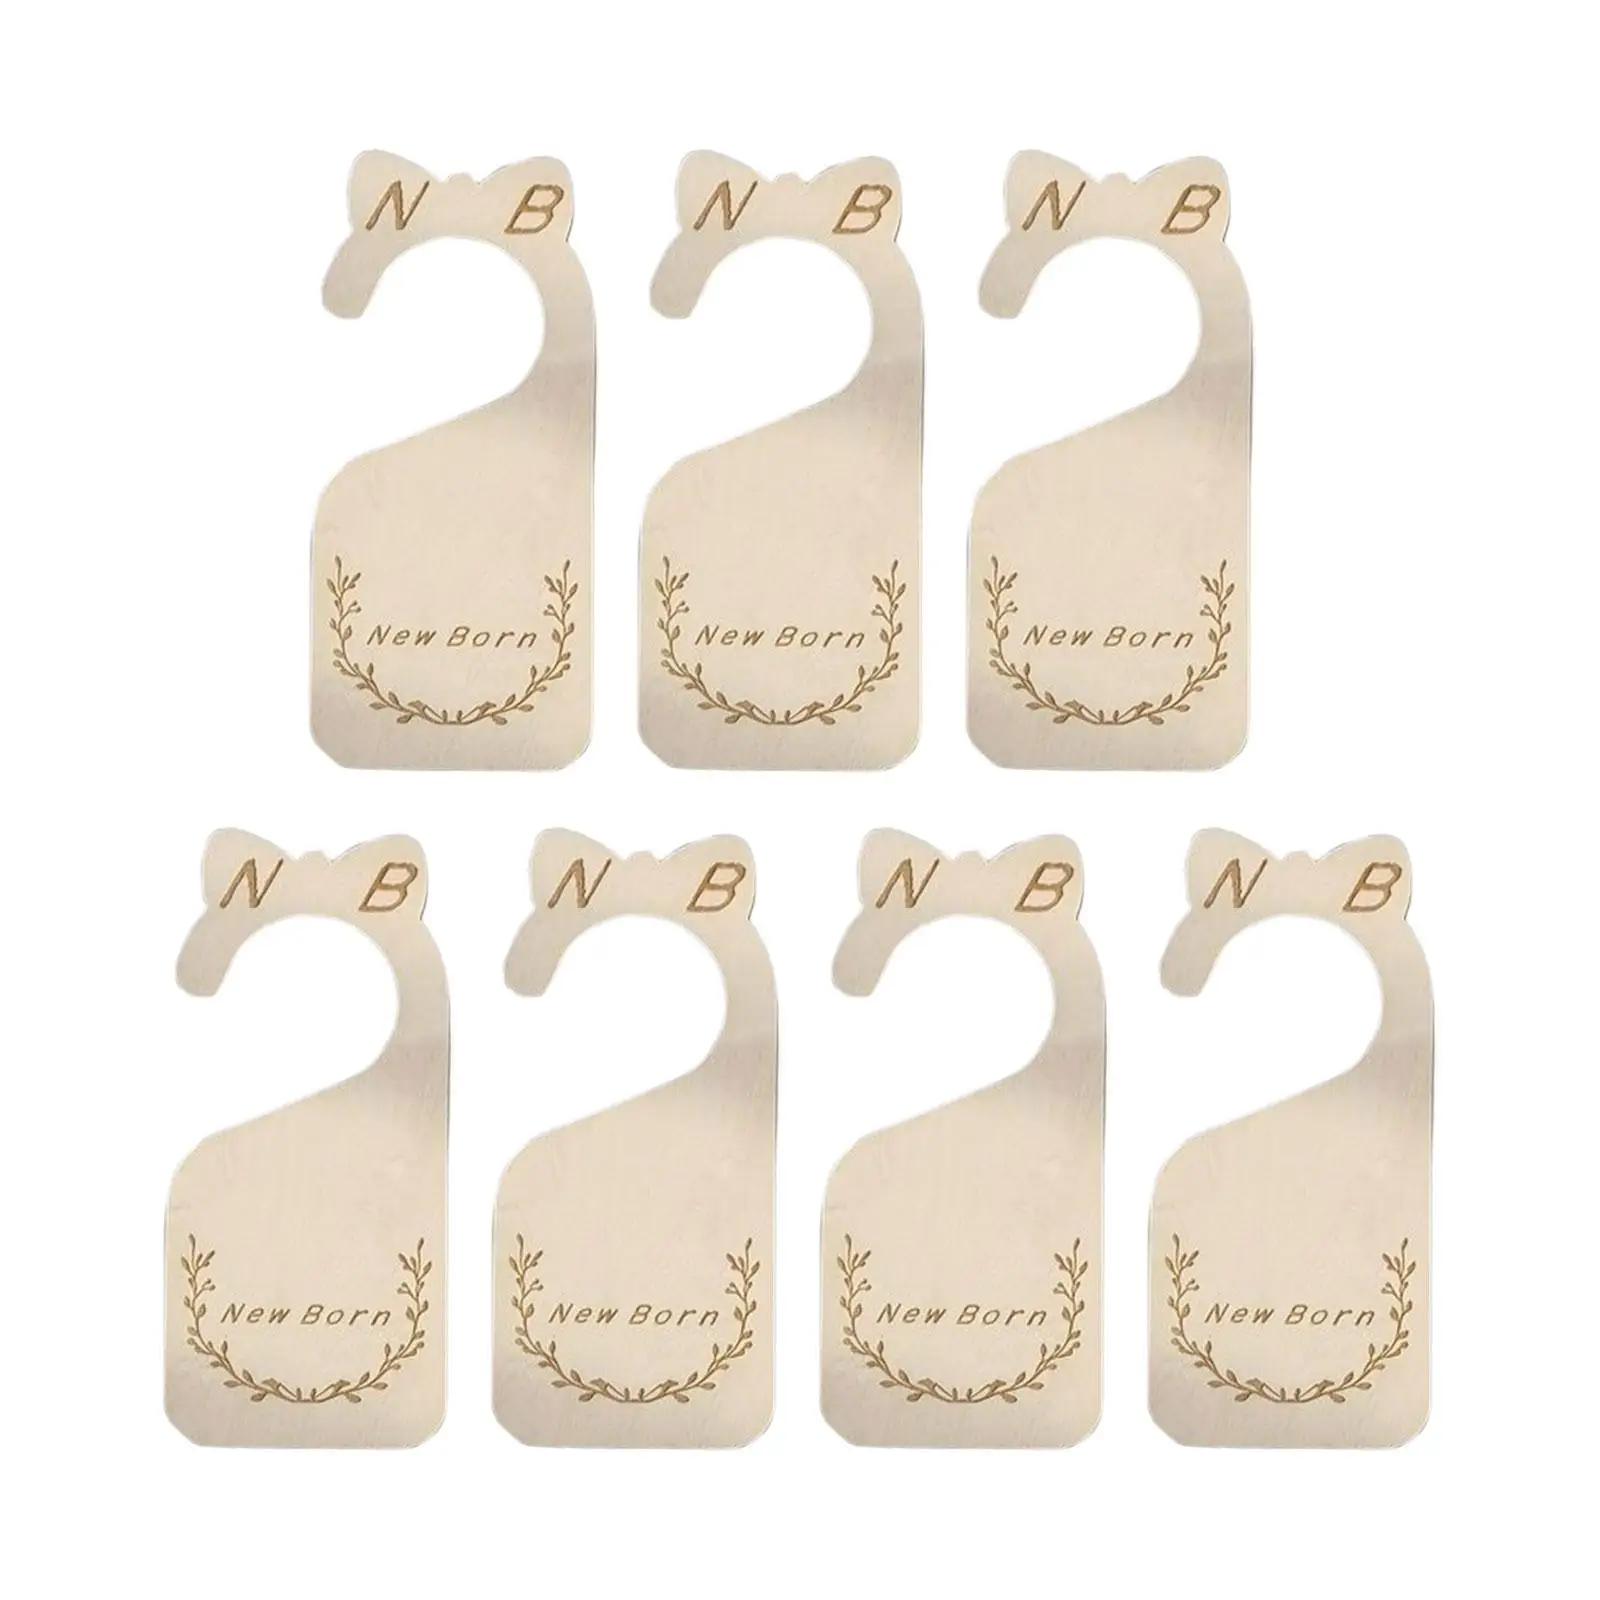 7x Baby Wardrobe Dividers, Adorable Etched Design Label Closet Organizer Tag, for Nursery Decor Infant to 24 Months Newborn Gift